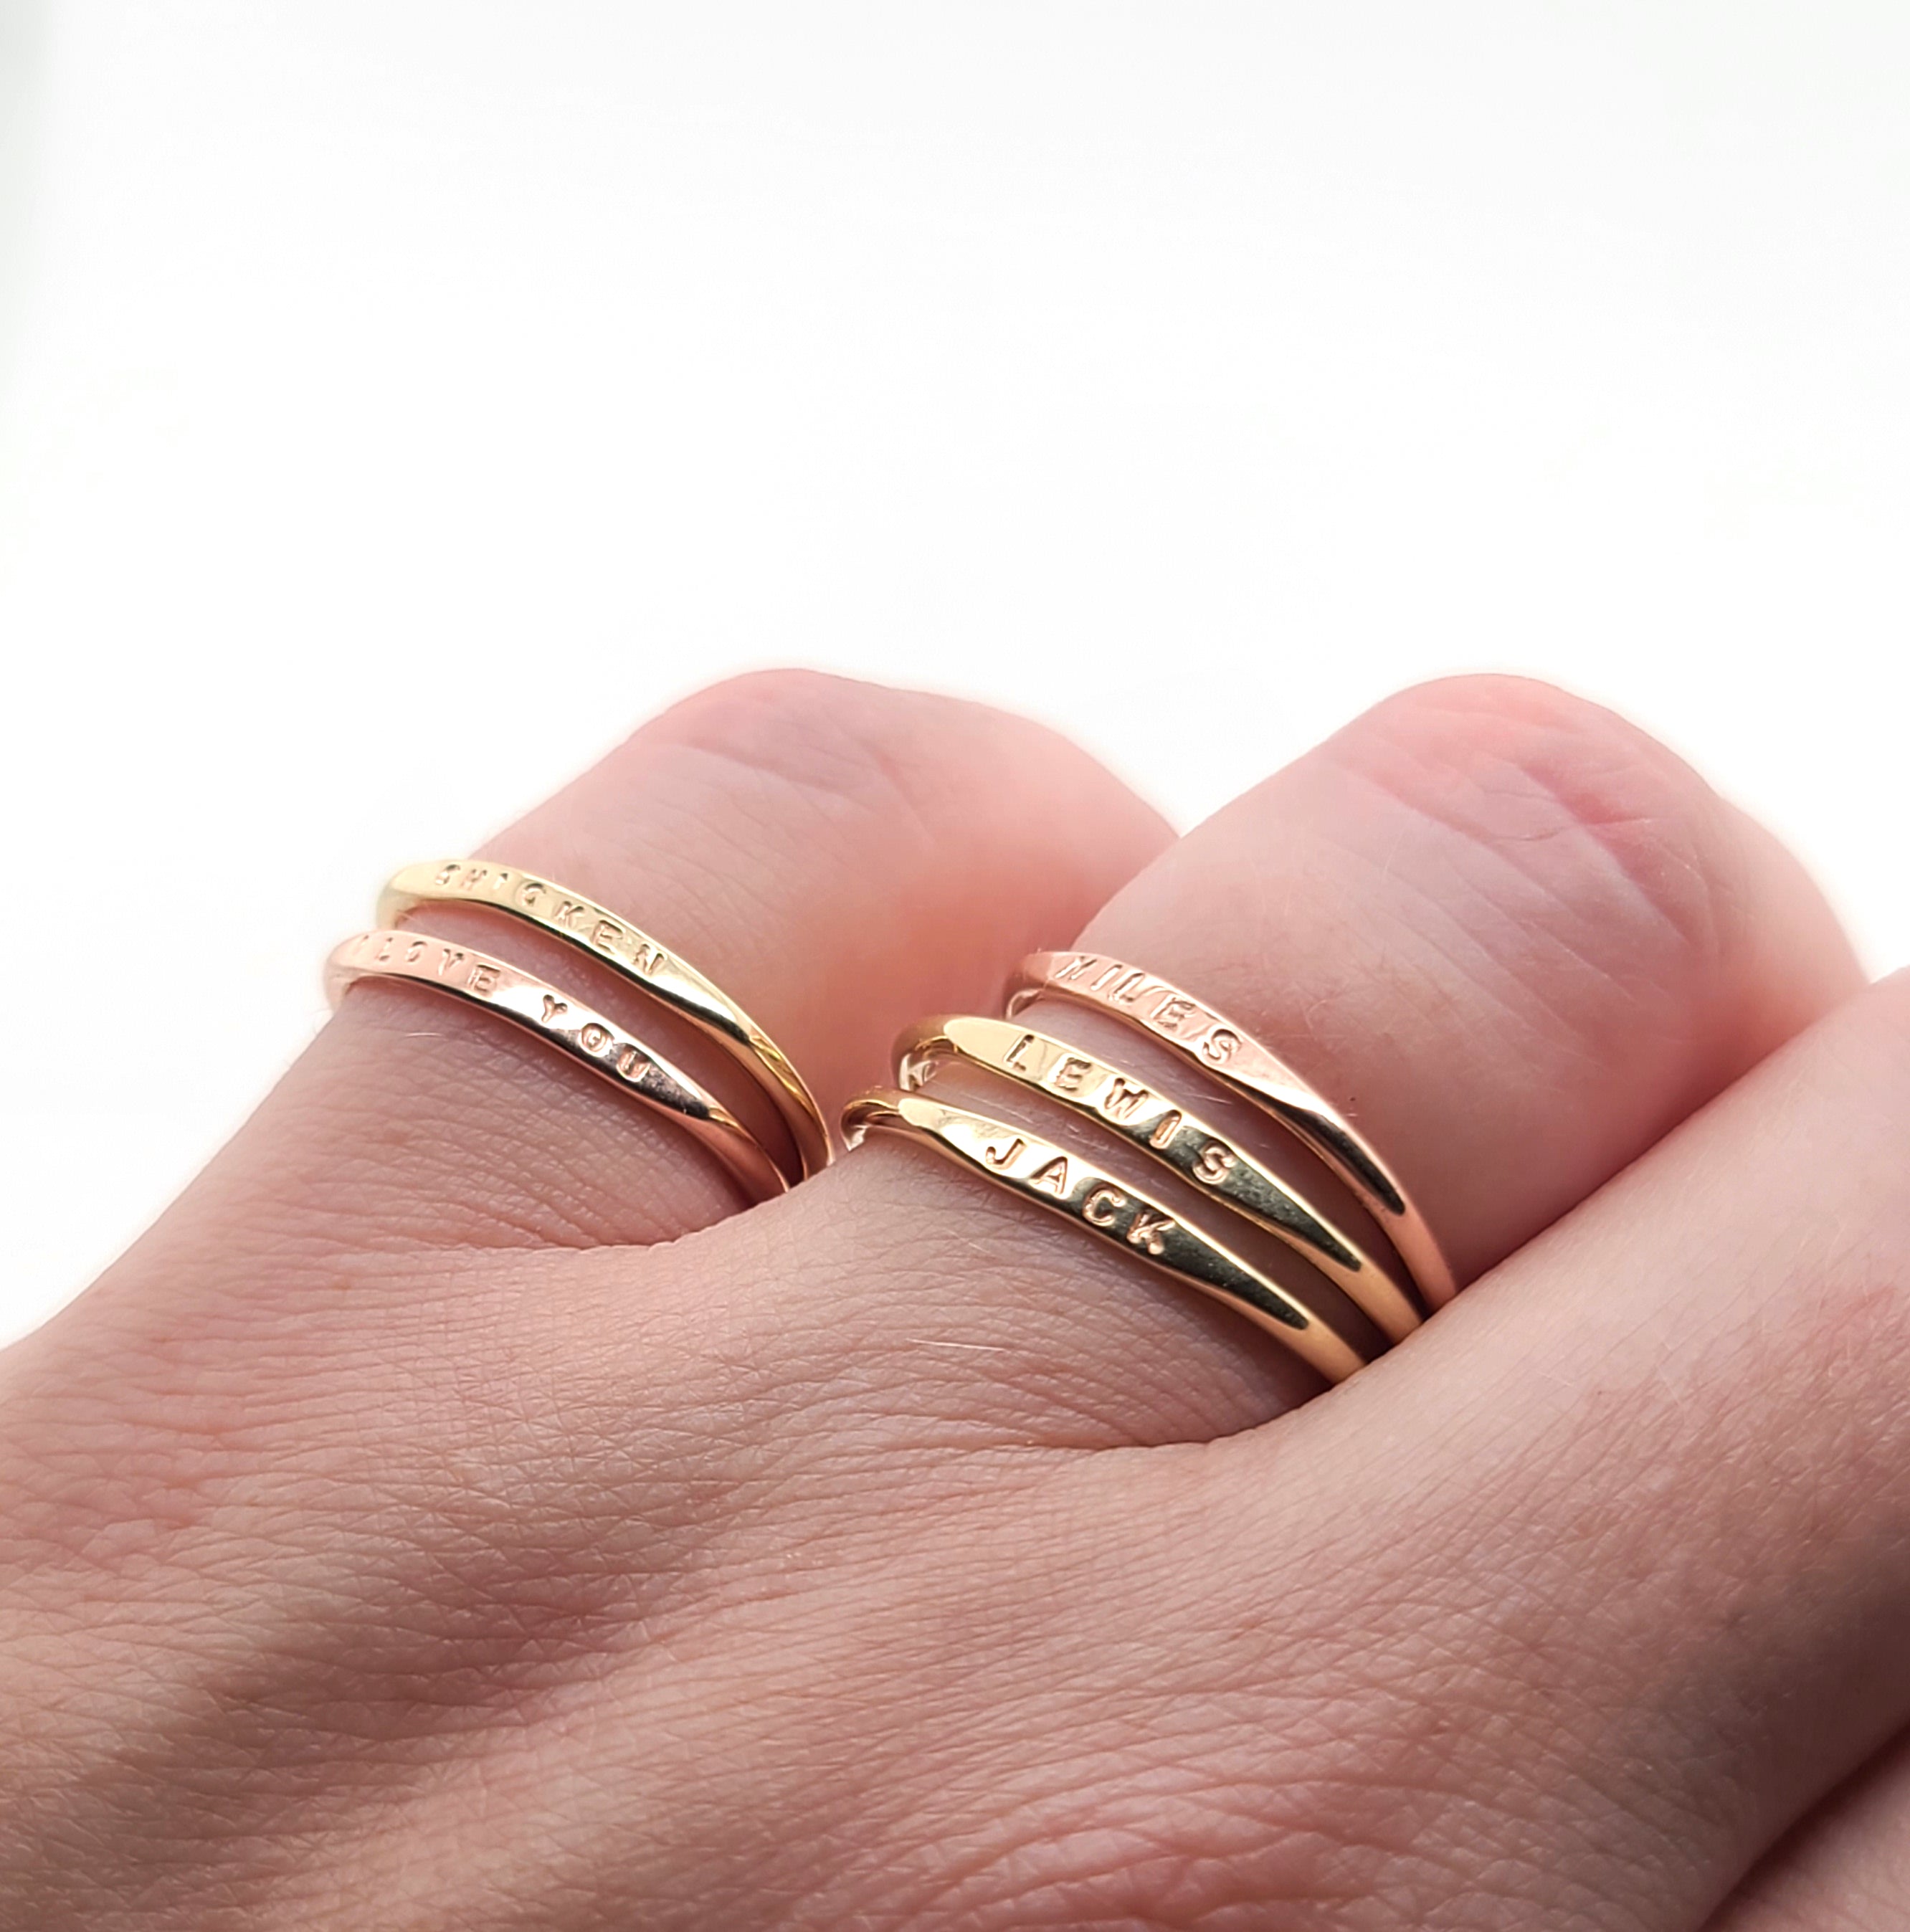 Gold Stackable Ring in Yellow, Rose or White Gold